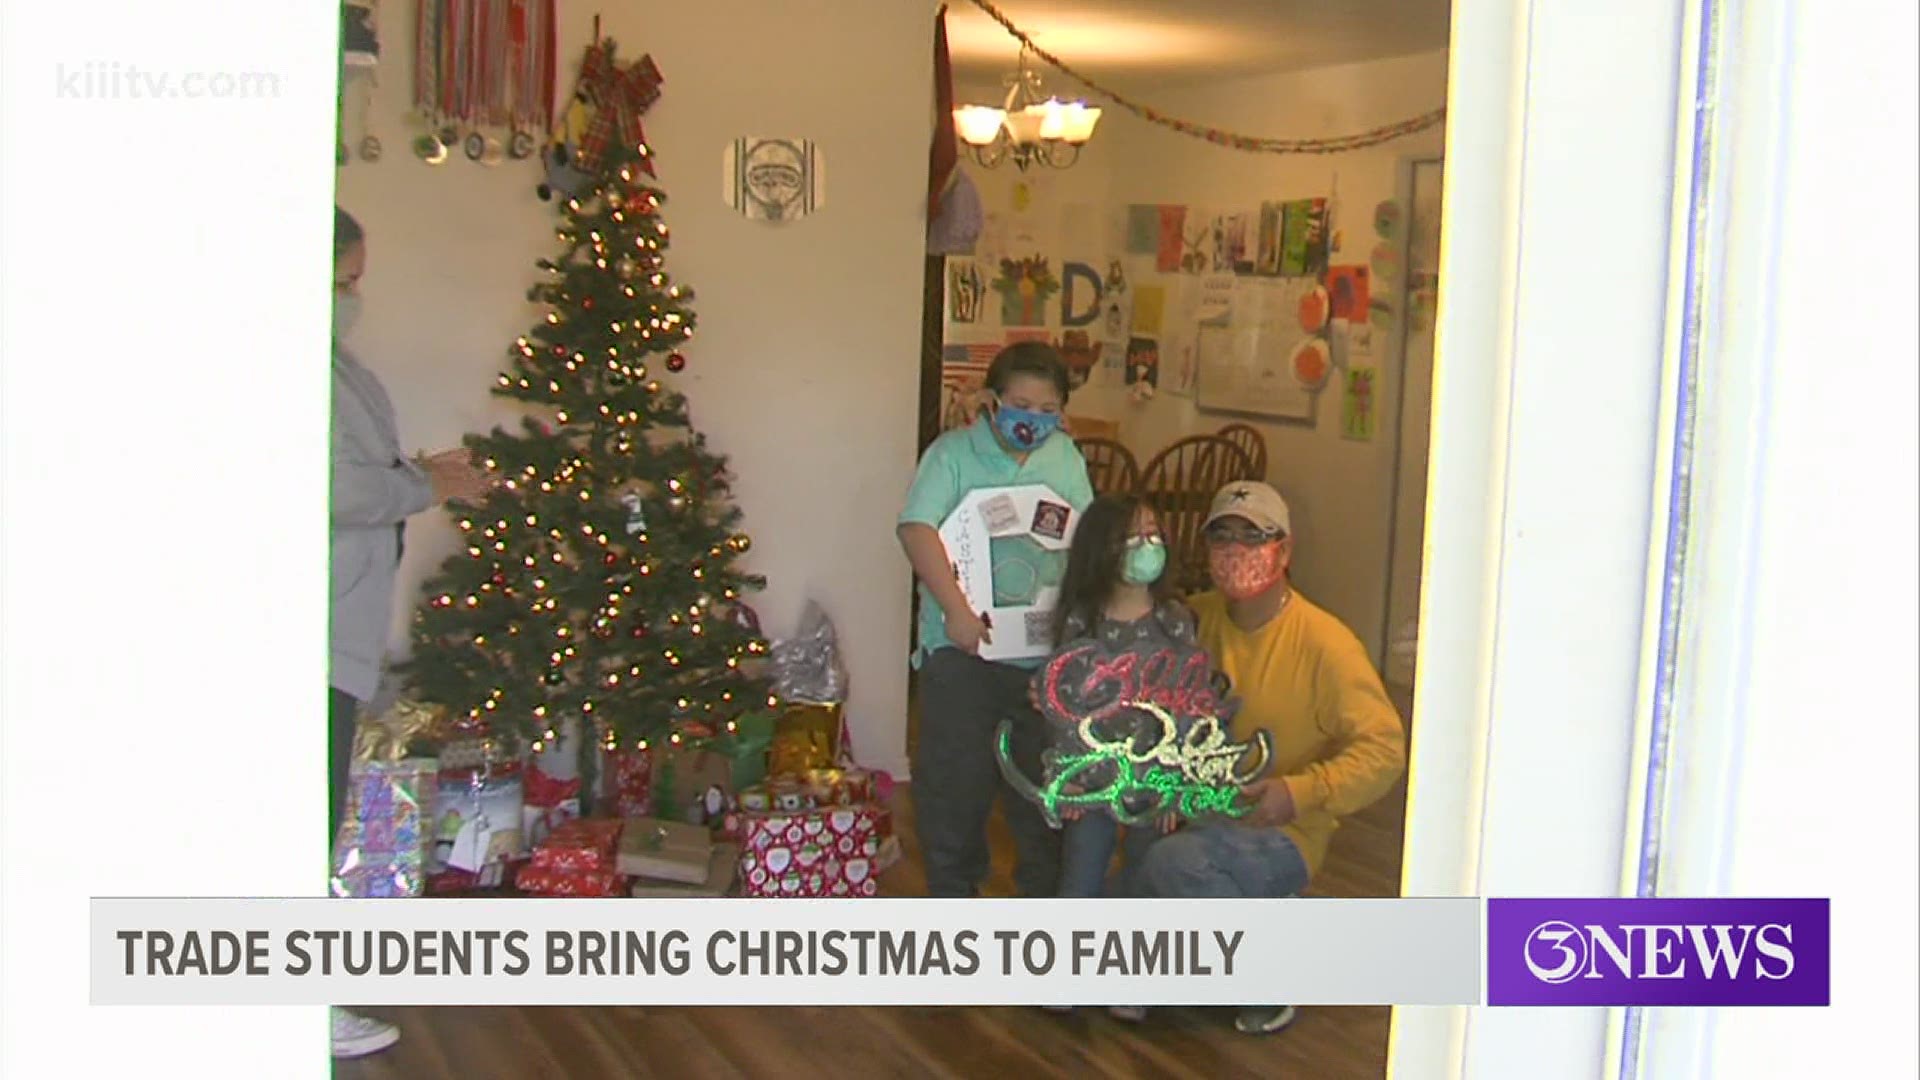 The Castillo family was given a Christmas tree, ornaments, stockings, candy and were brought joy.